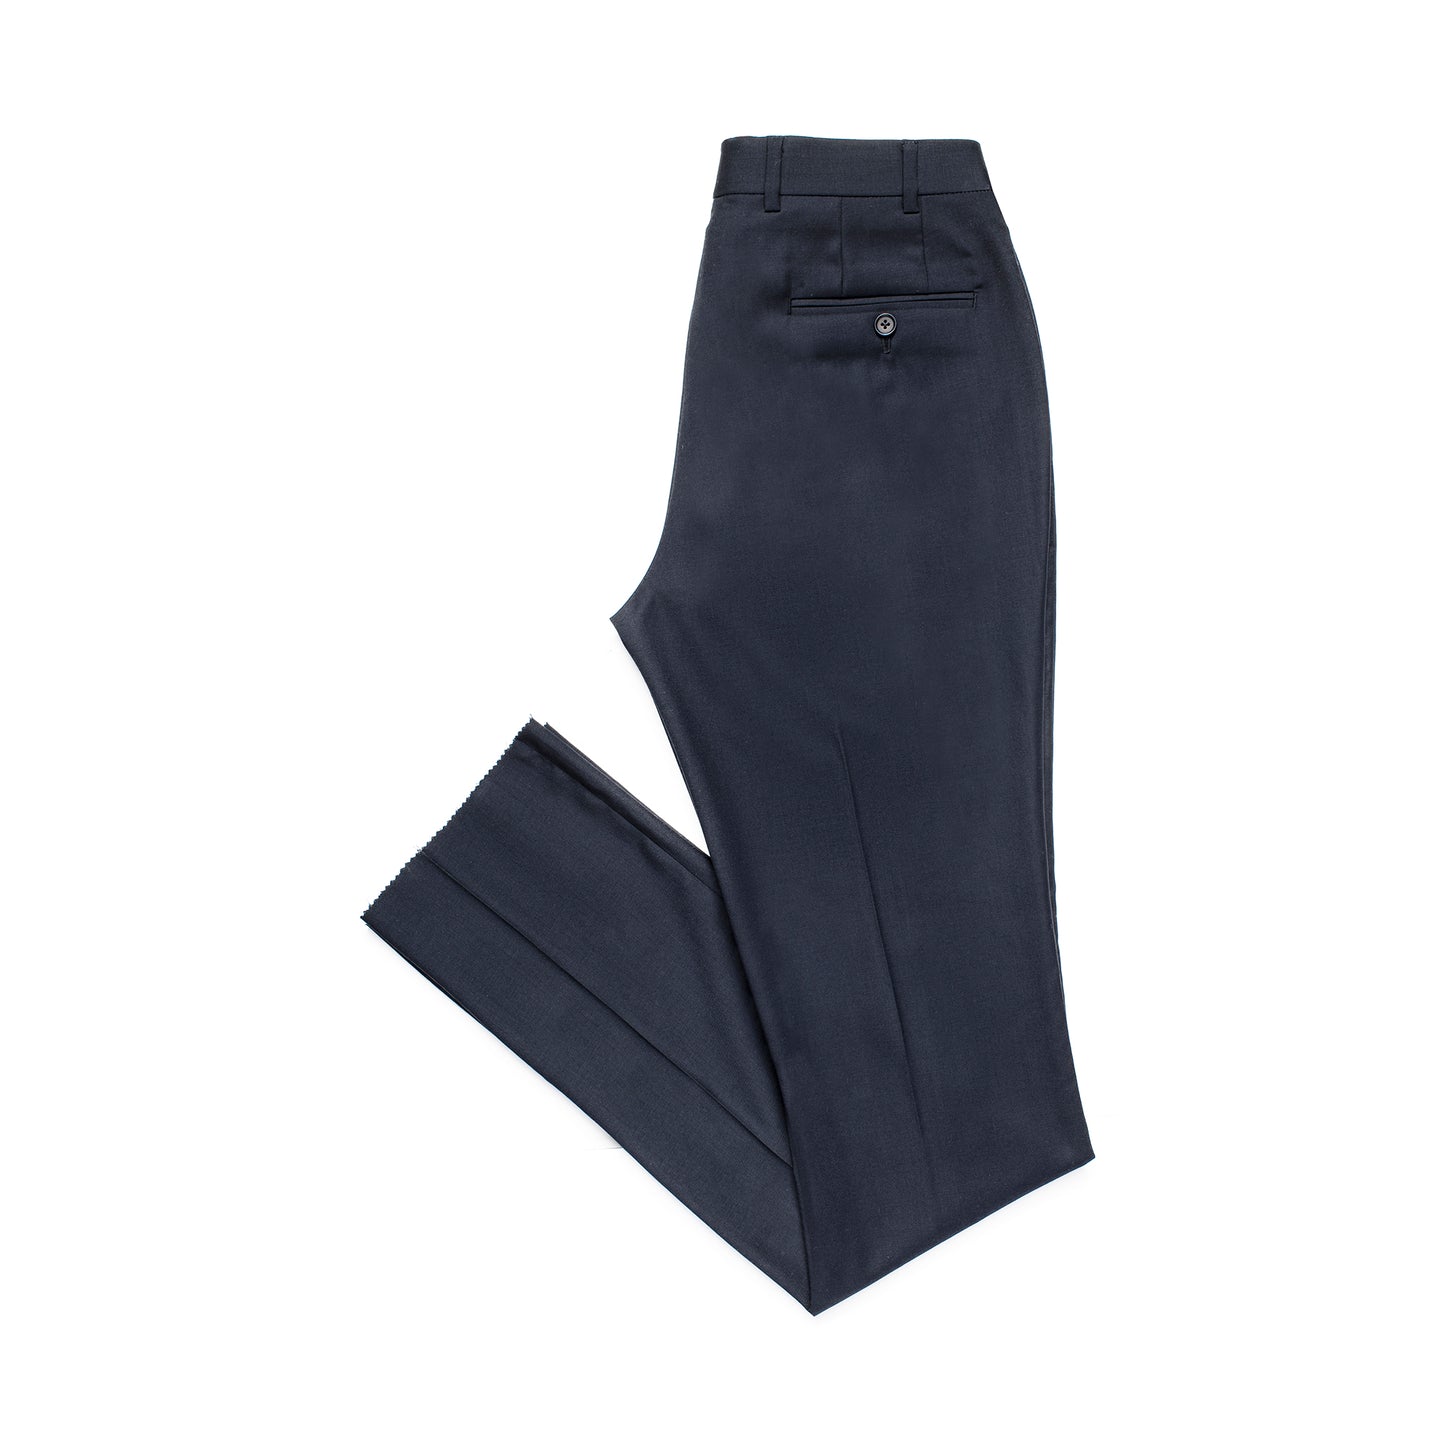 Solid Navy Suits Trouser for Men